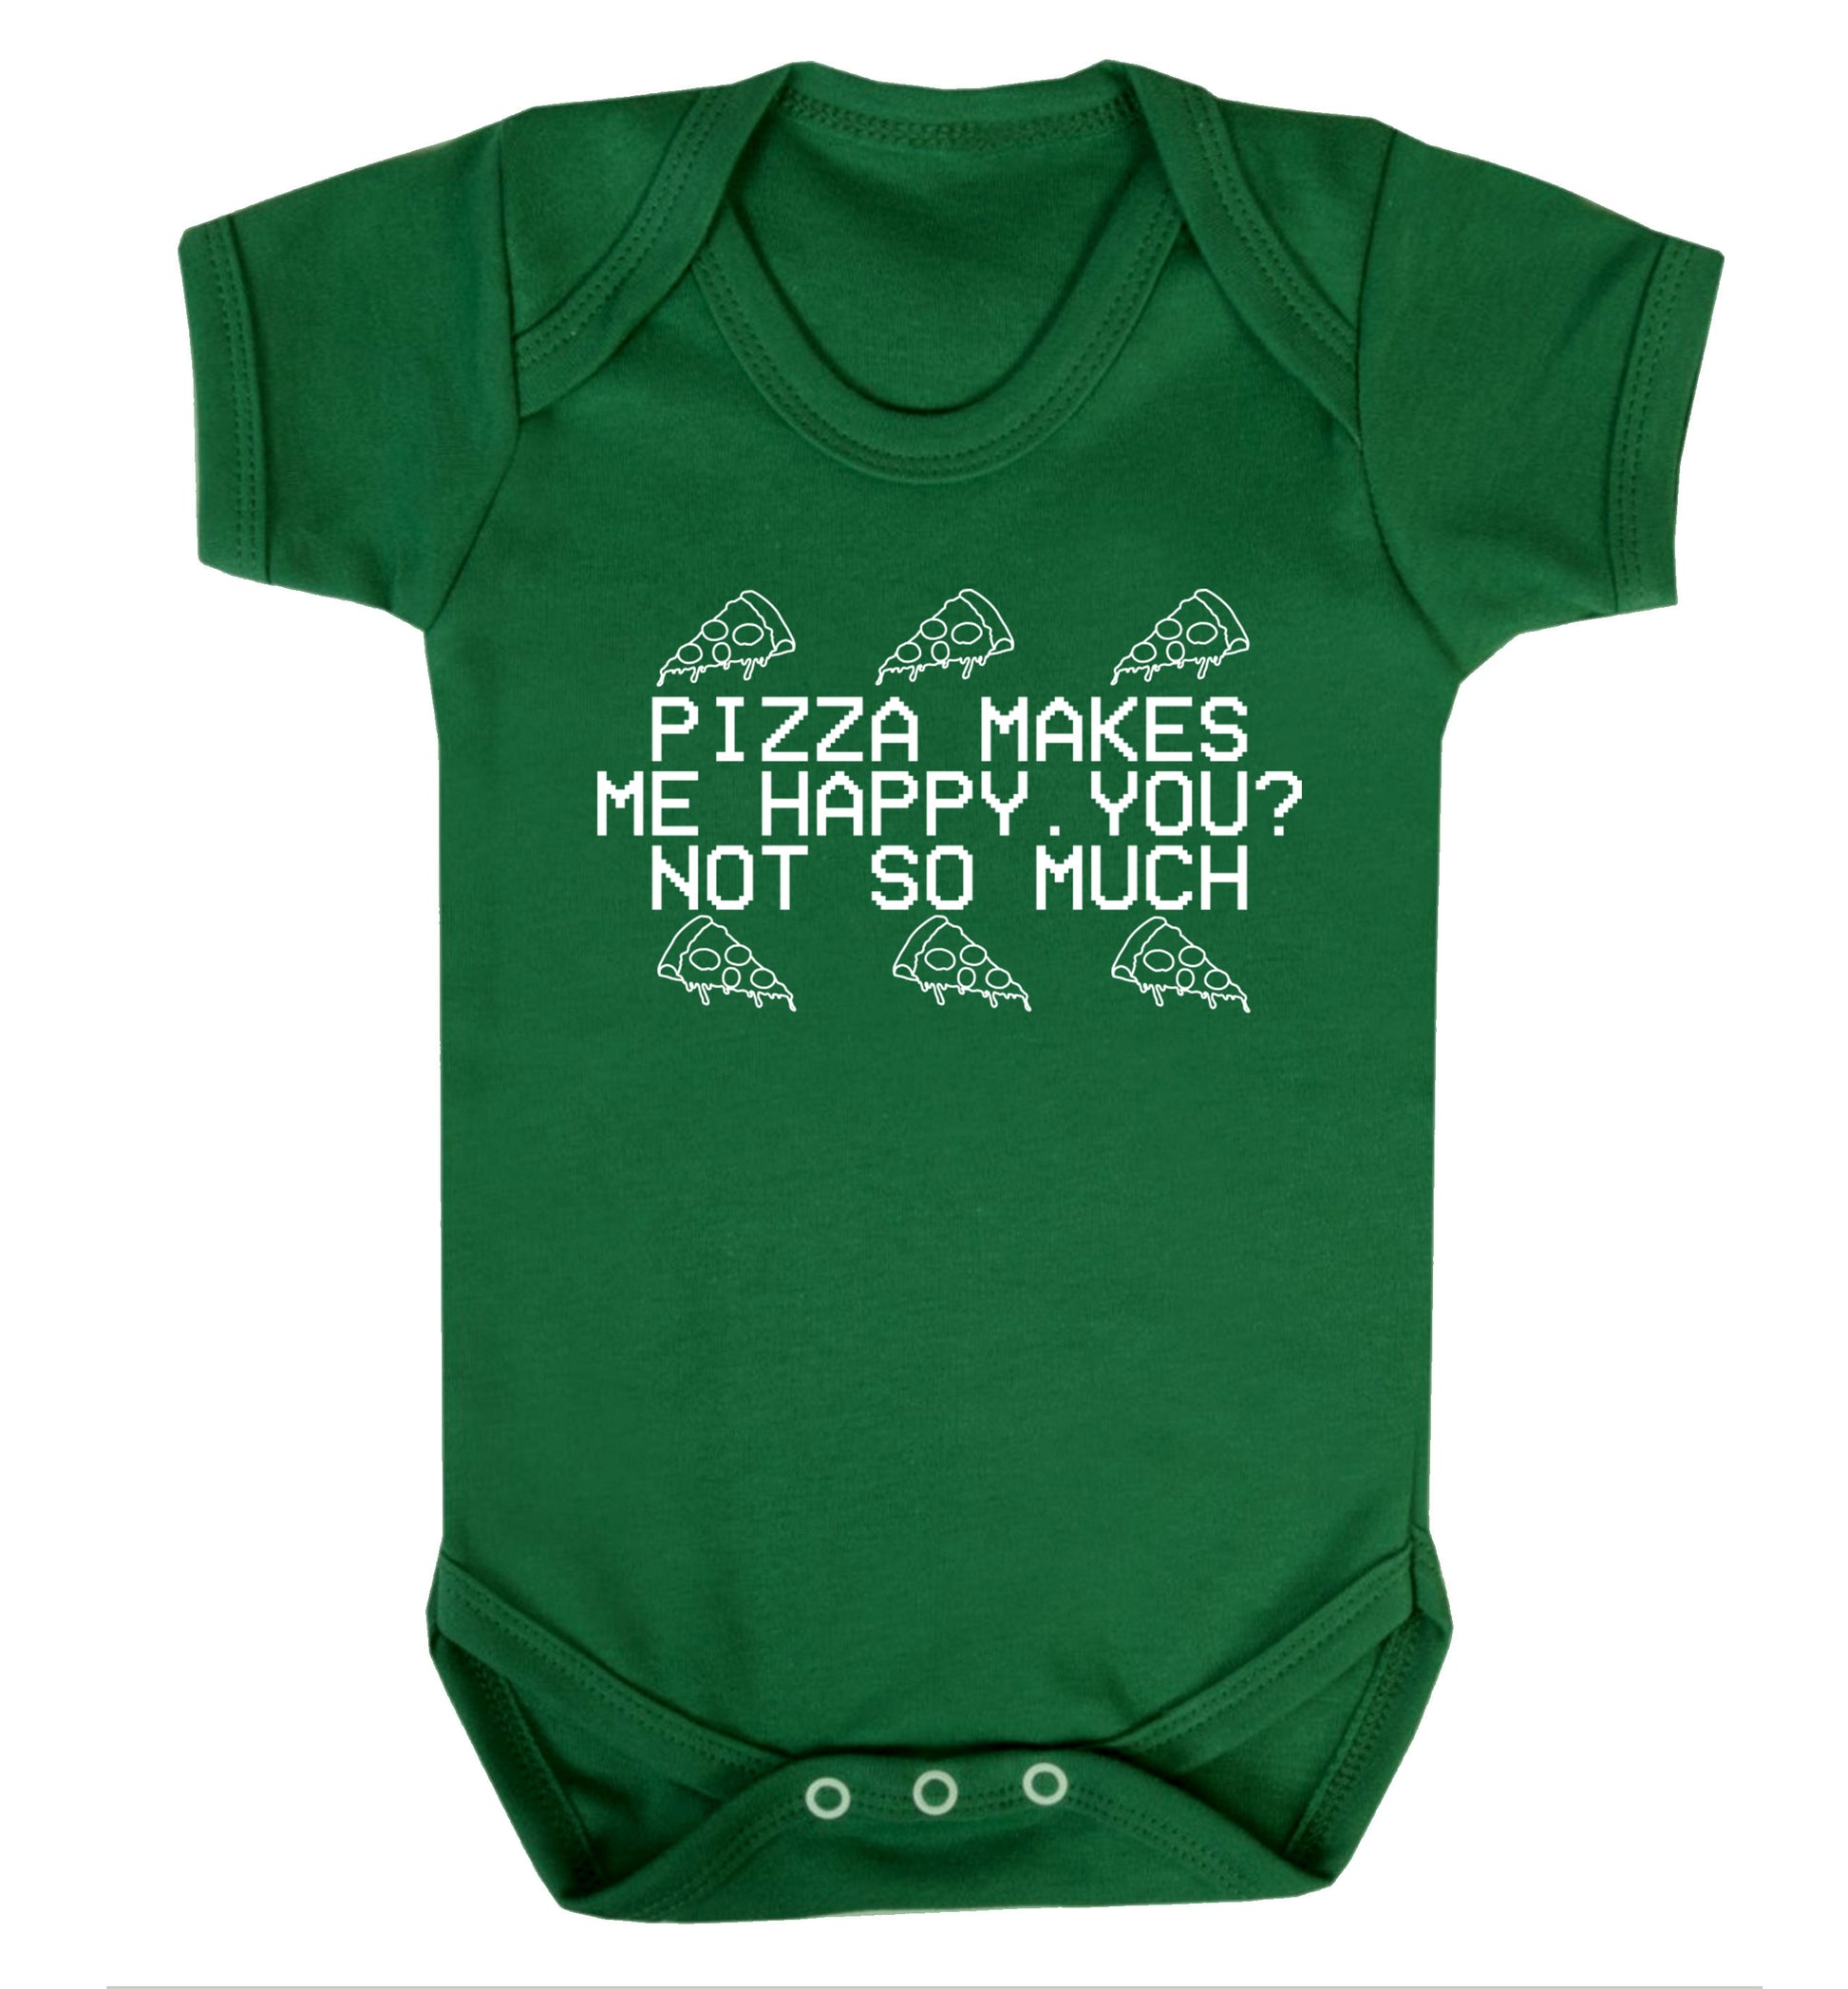 Pizza makes me happy, You? Not so much Baby Vest green 18-24 months